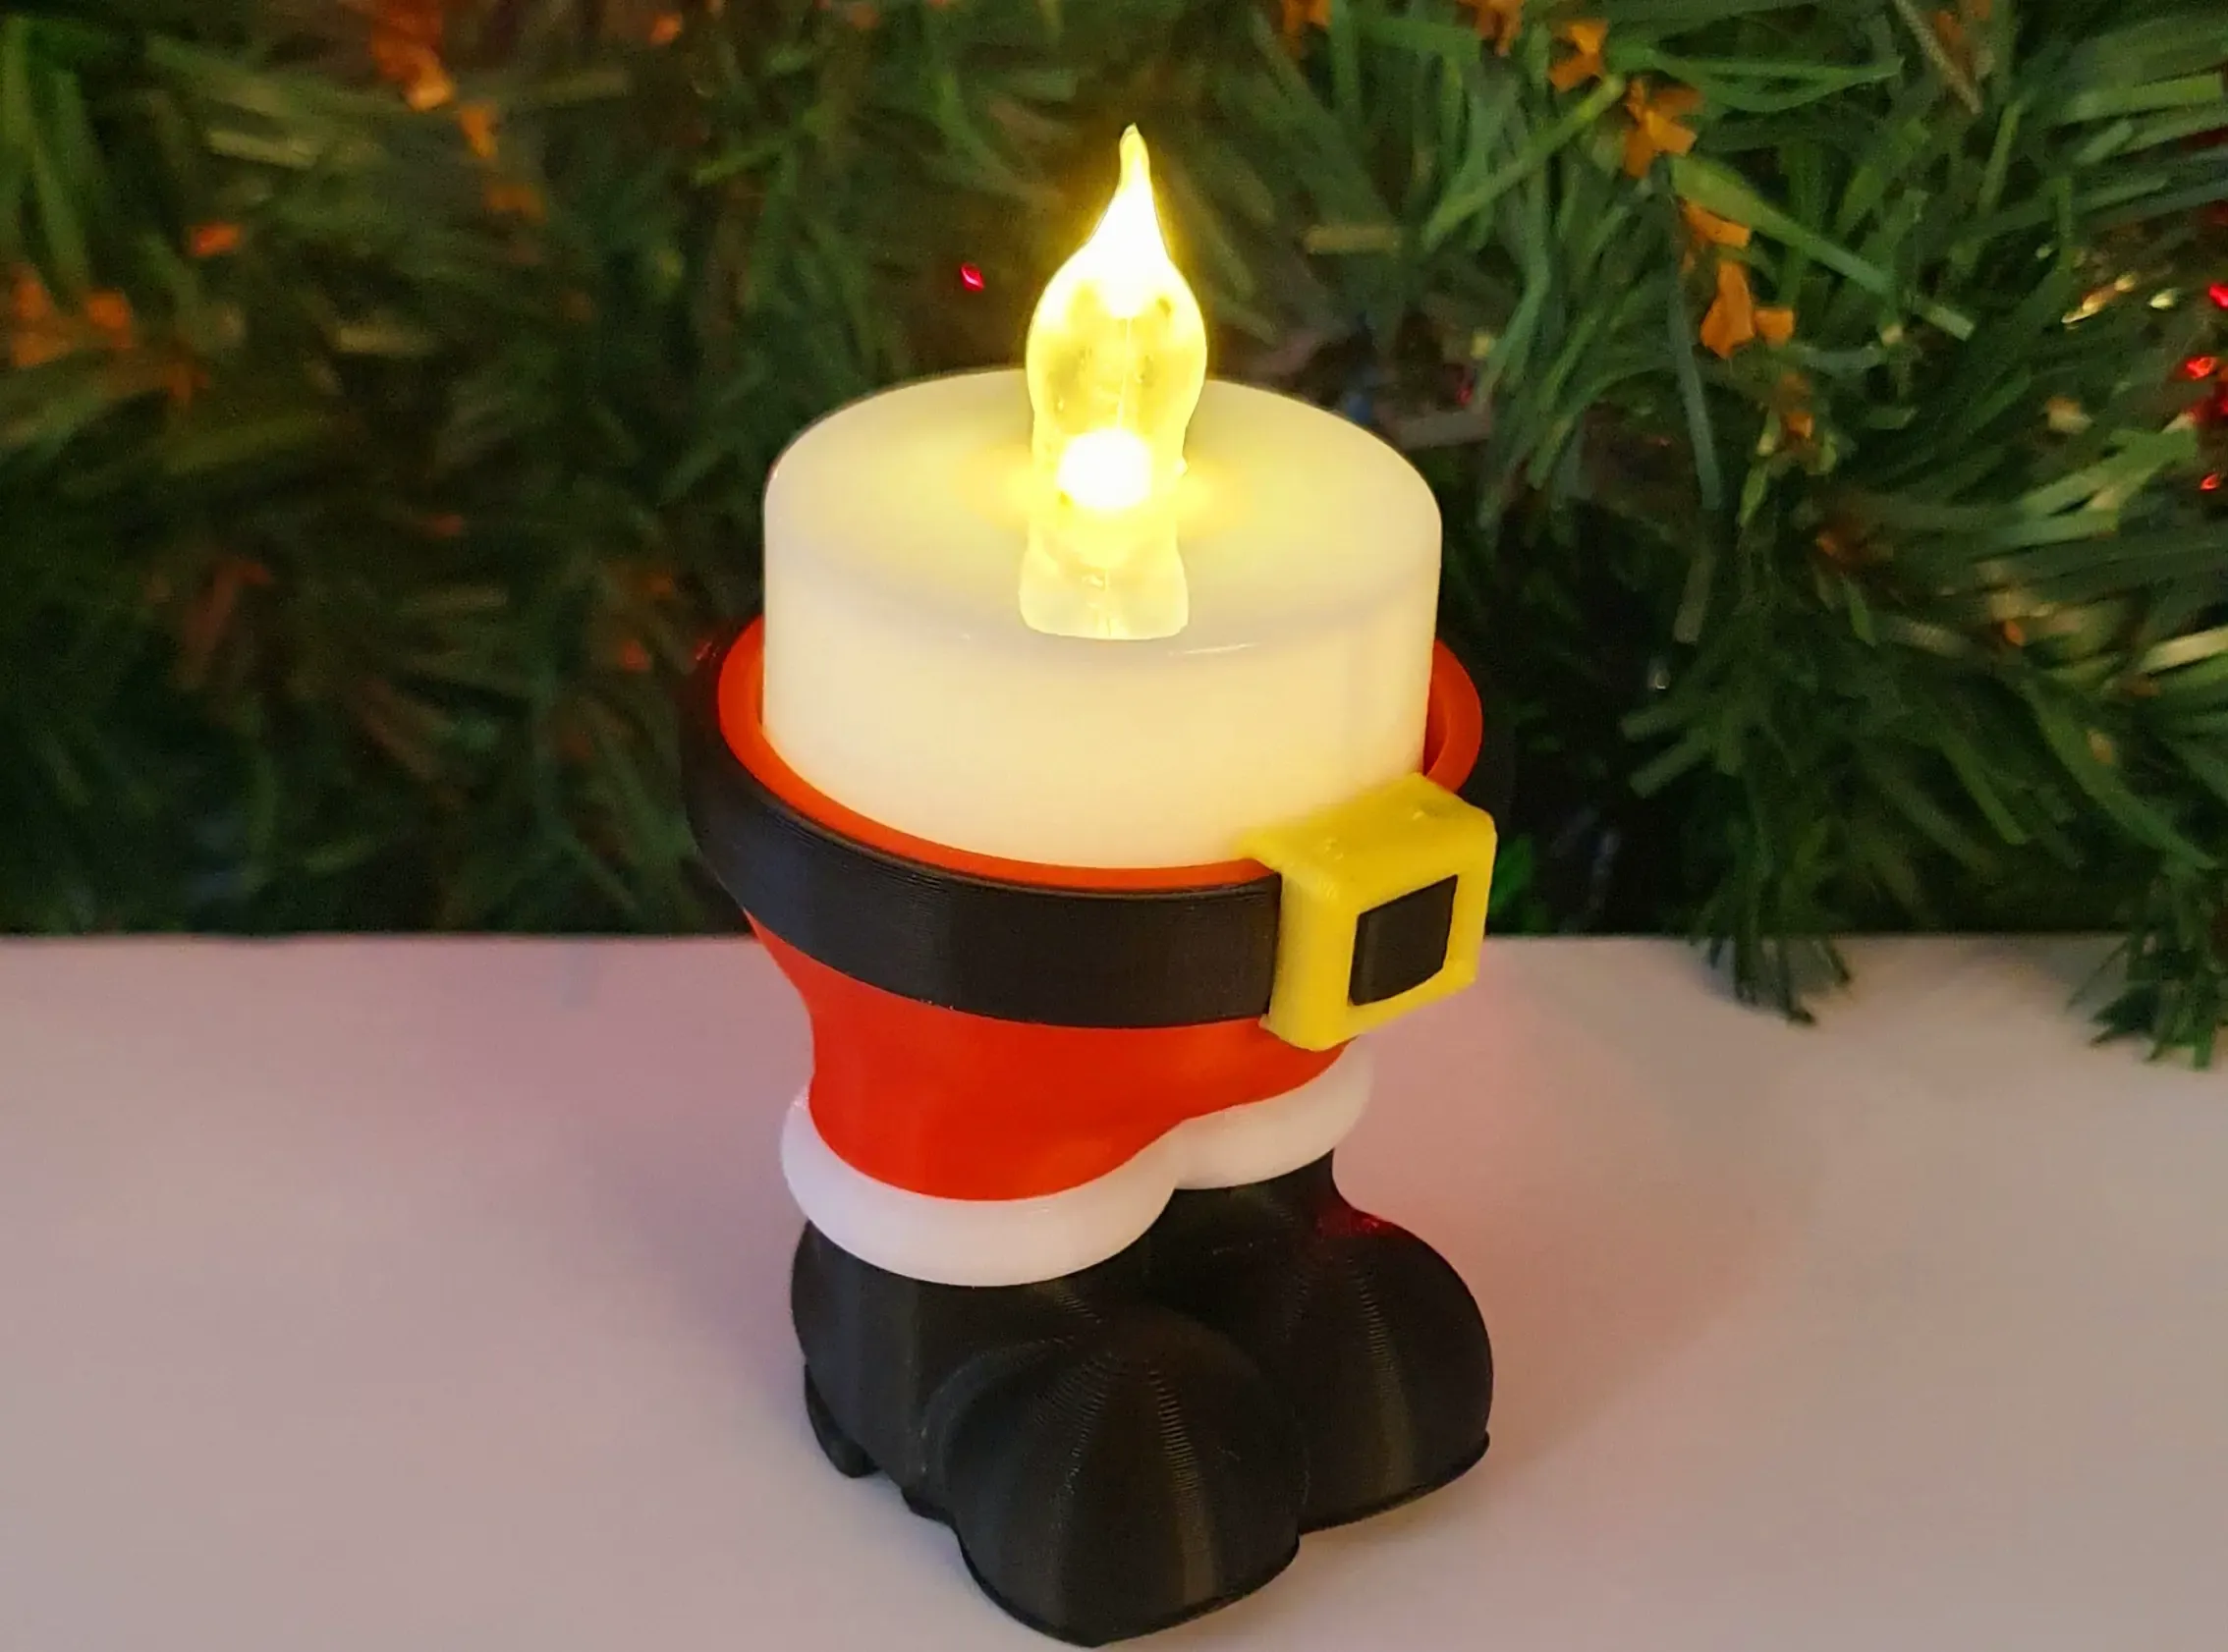 Santa Claus and Mrs Claus Candle holder